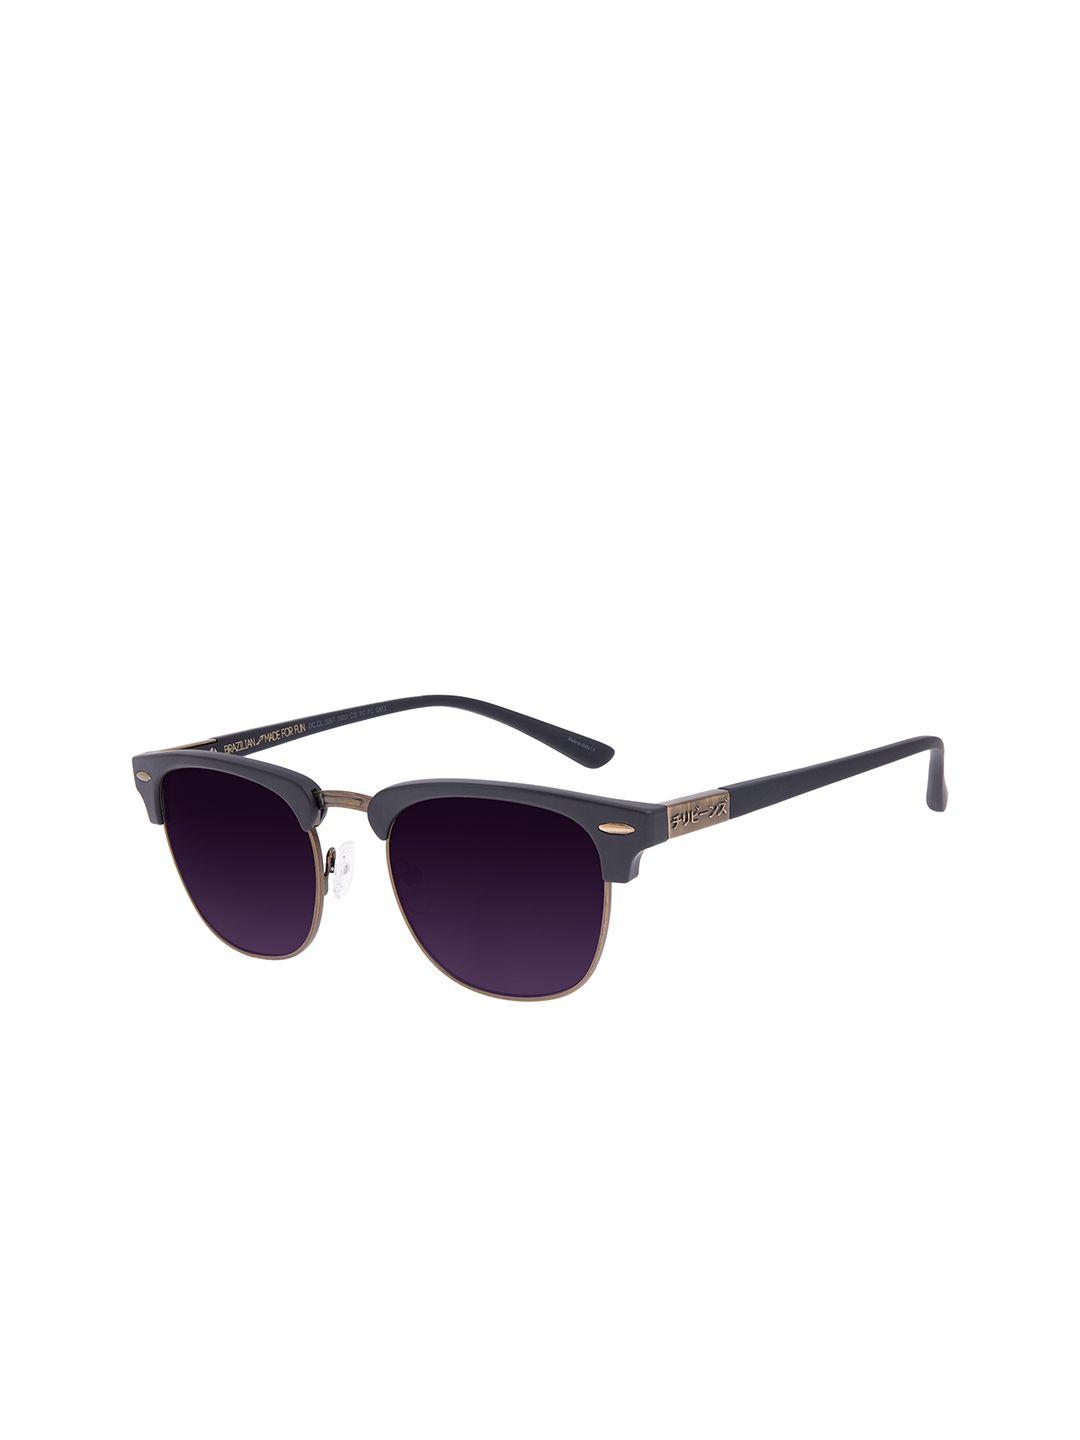 chilli-beans-unisex-purple-lens-round-sunglasses-with-uv-protected-lens-occl30672002